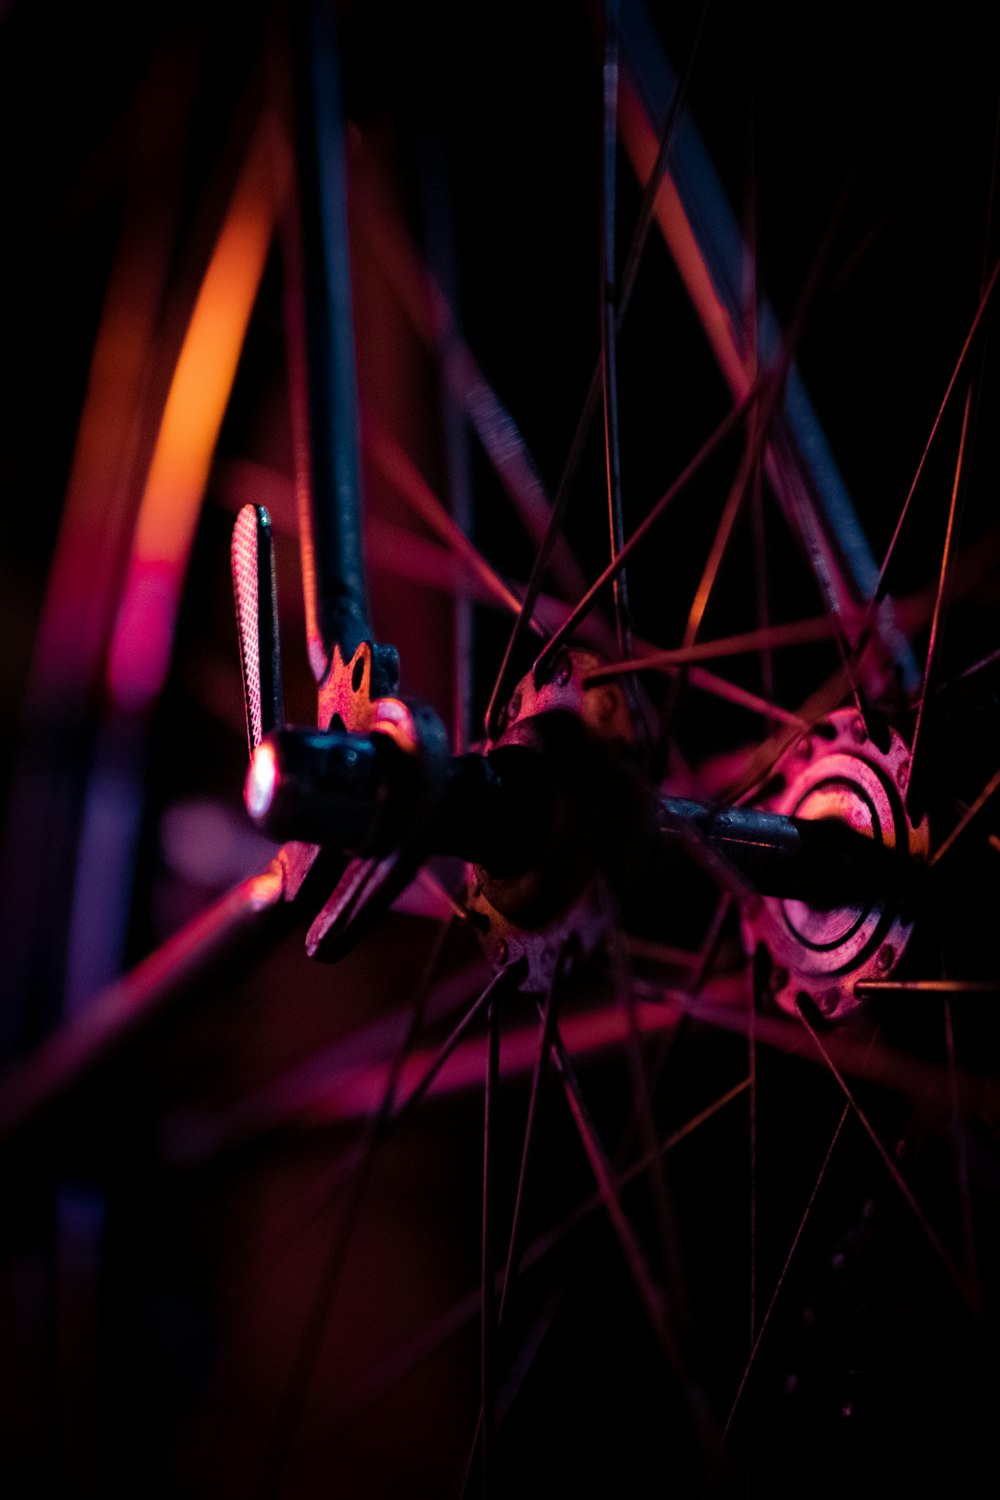 a close up of a bicycle spokes and spokes